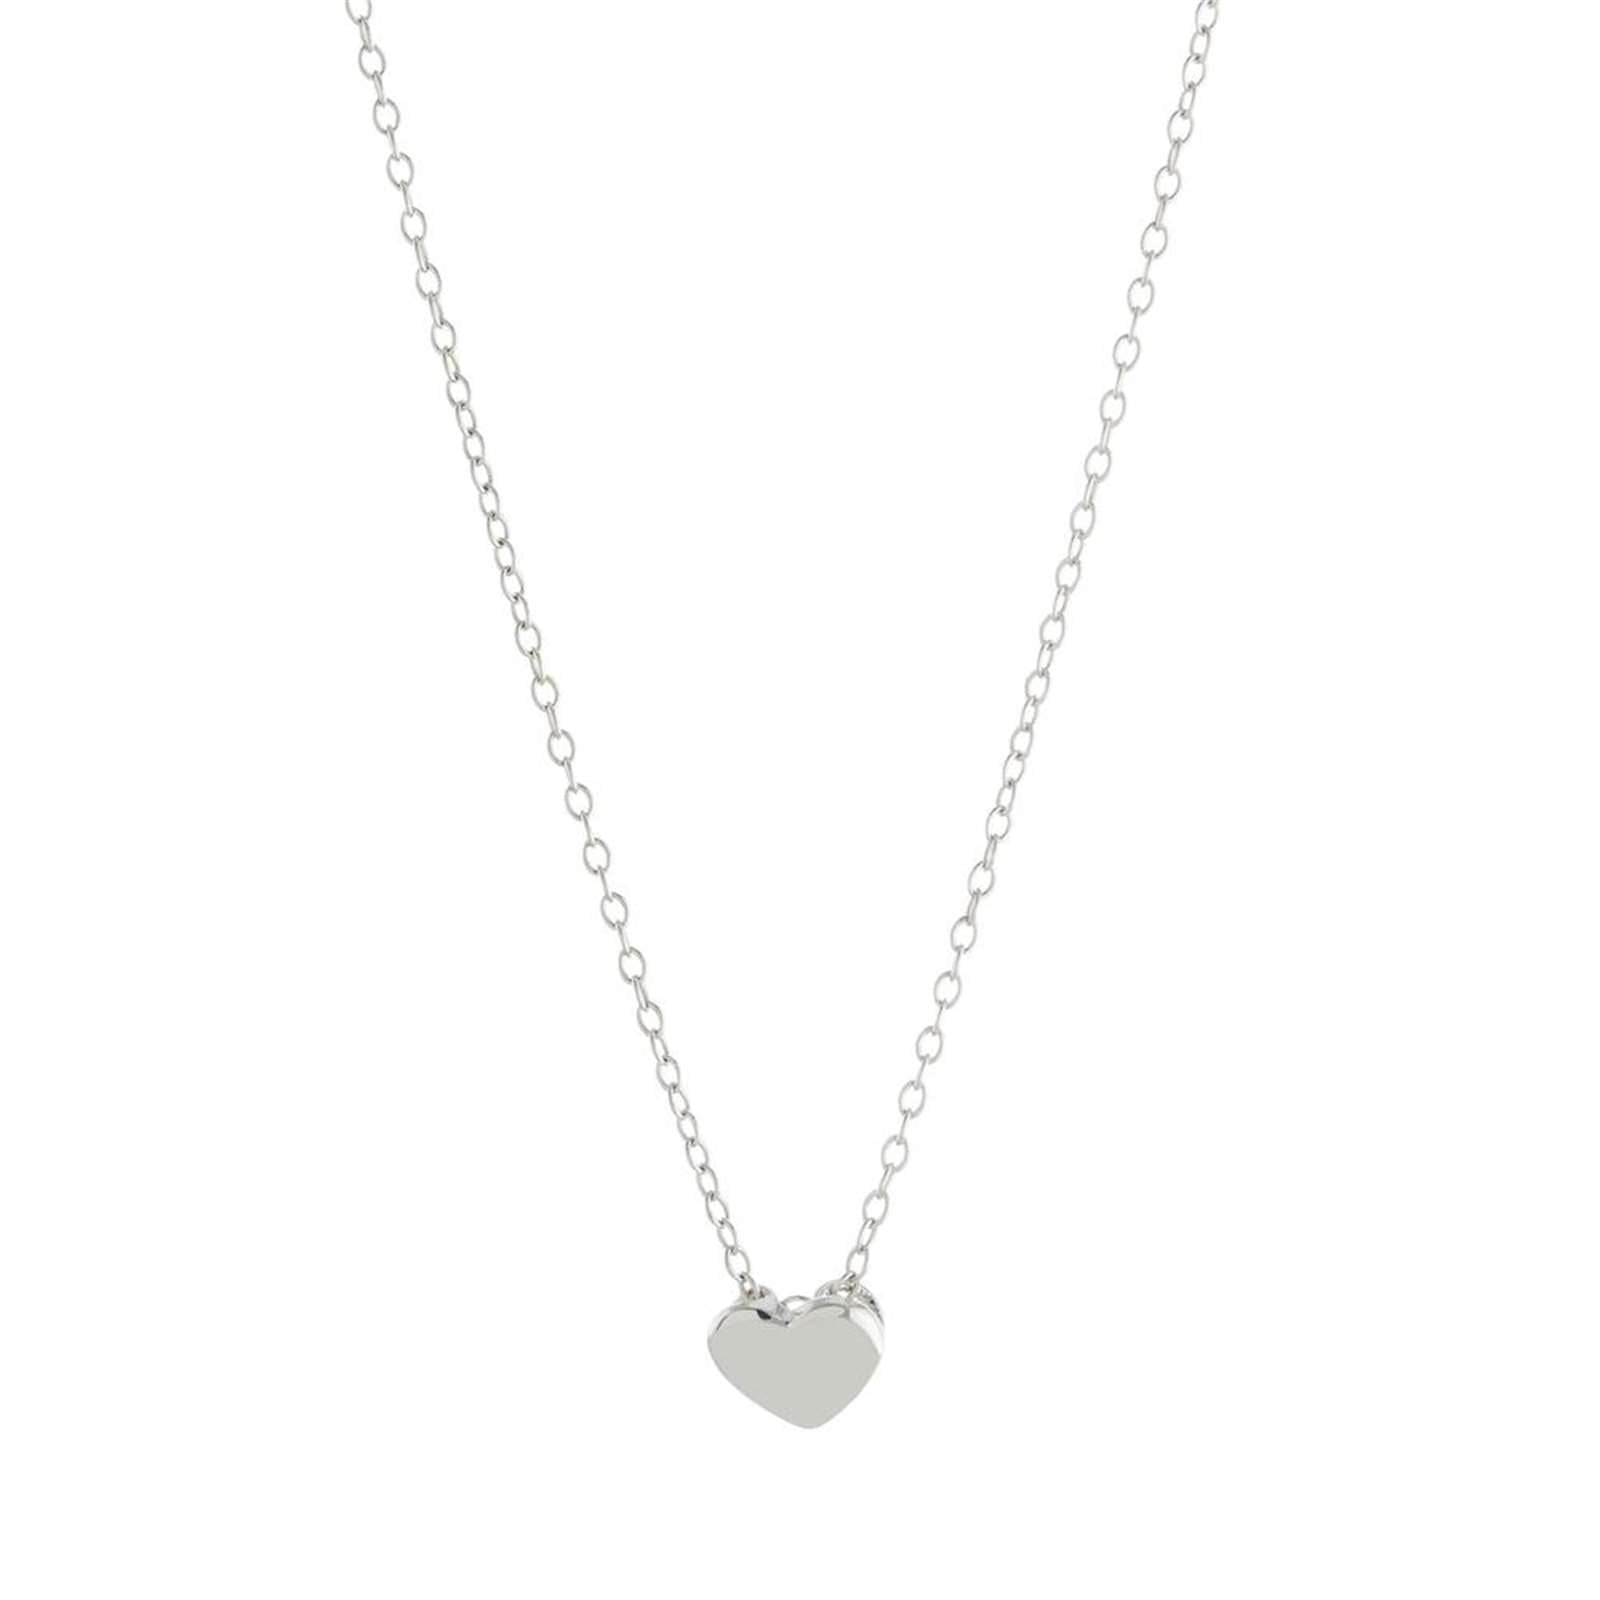 Athra Women Small Heart Necklace With Extension